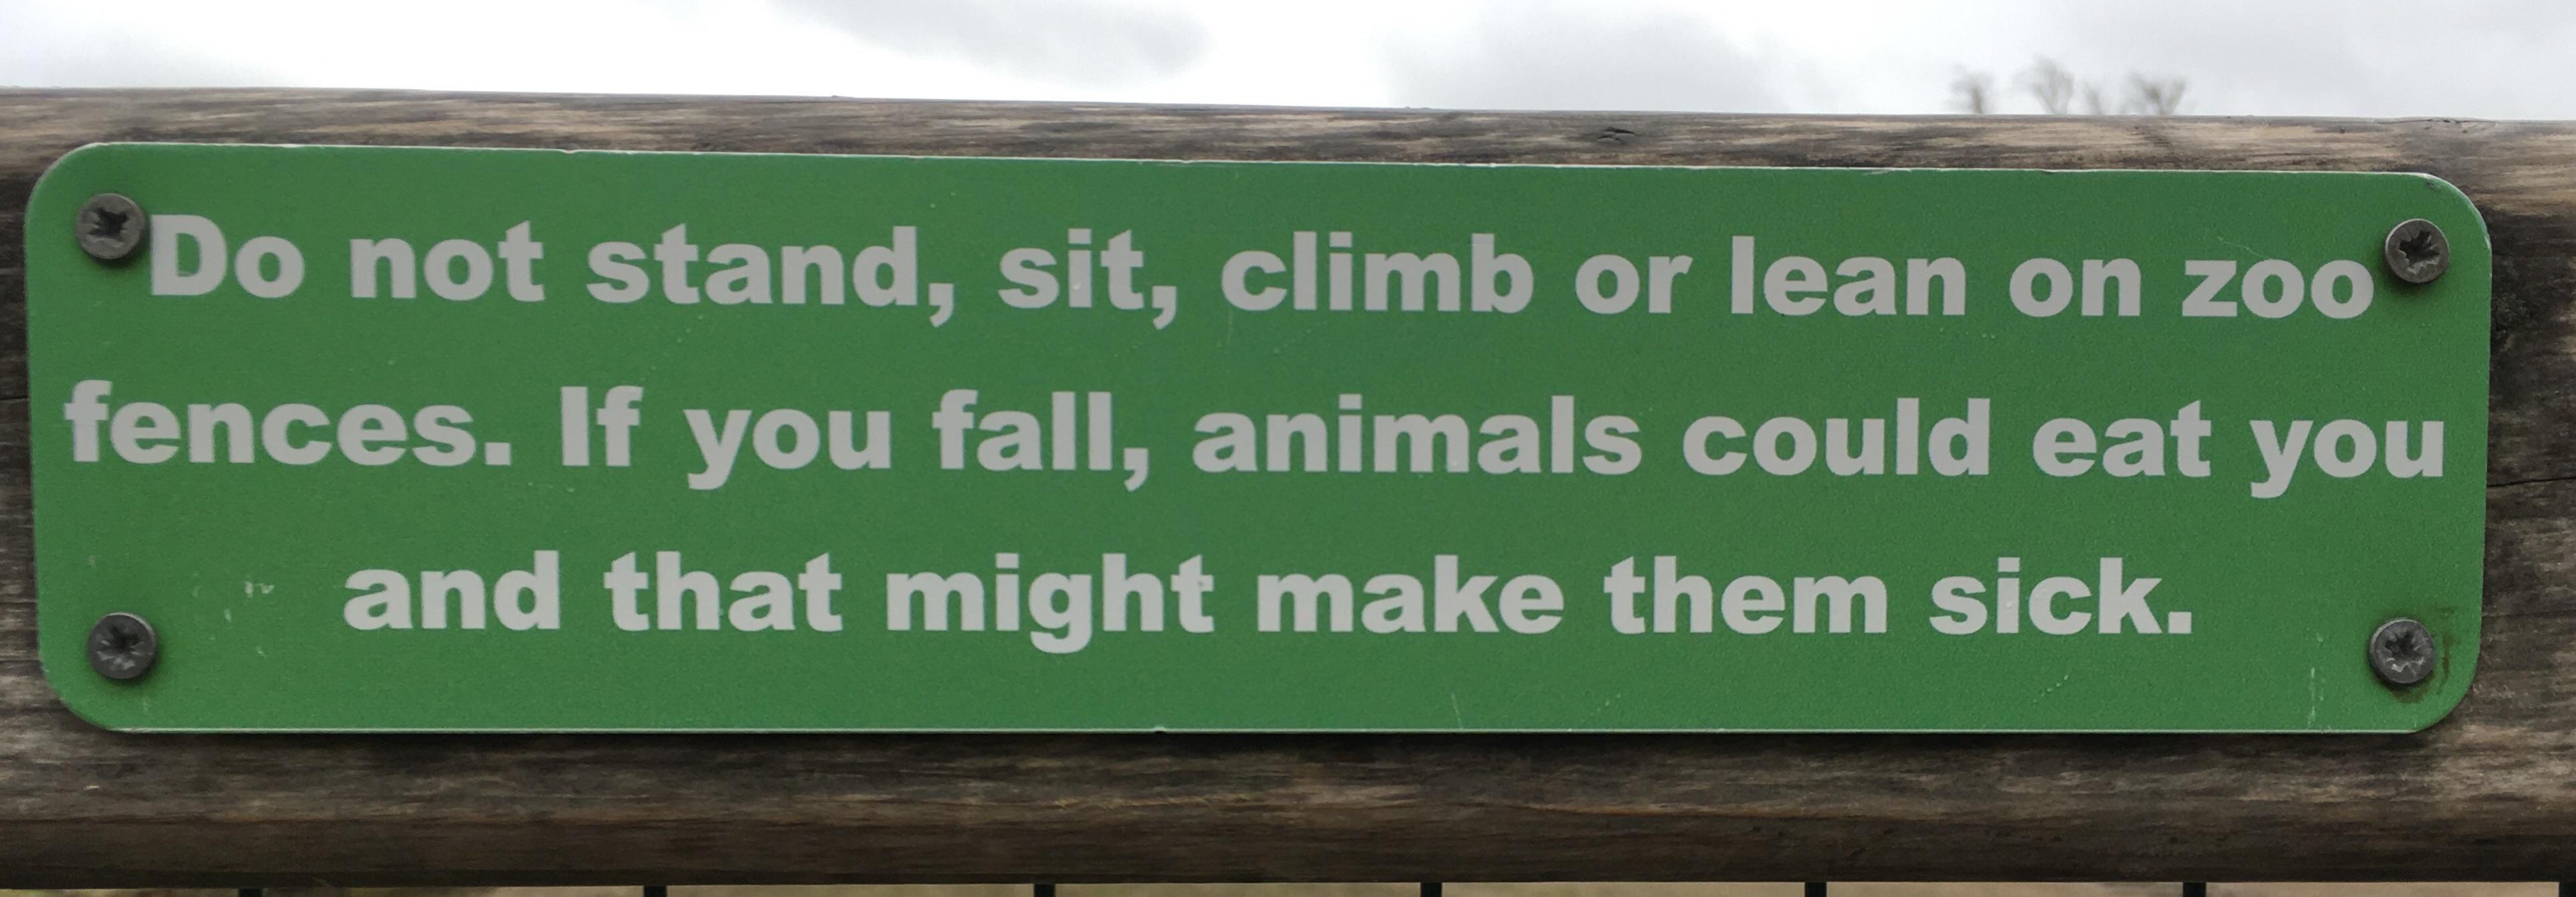 This sign at the zoo